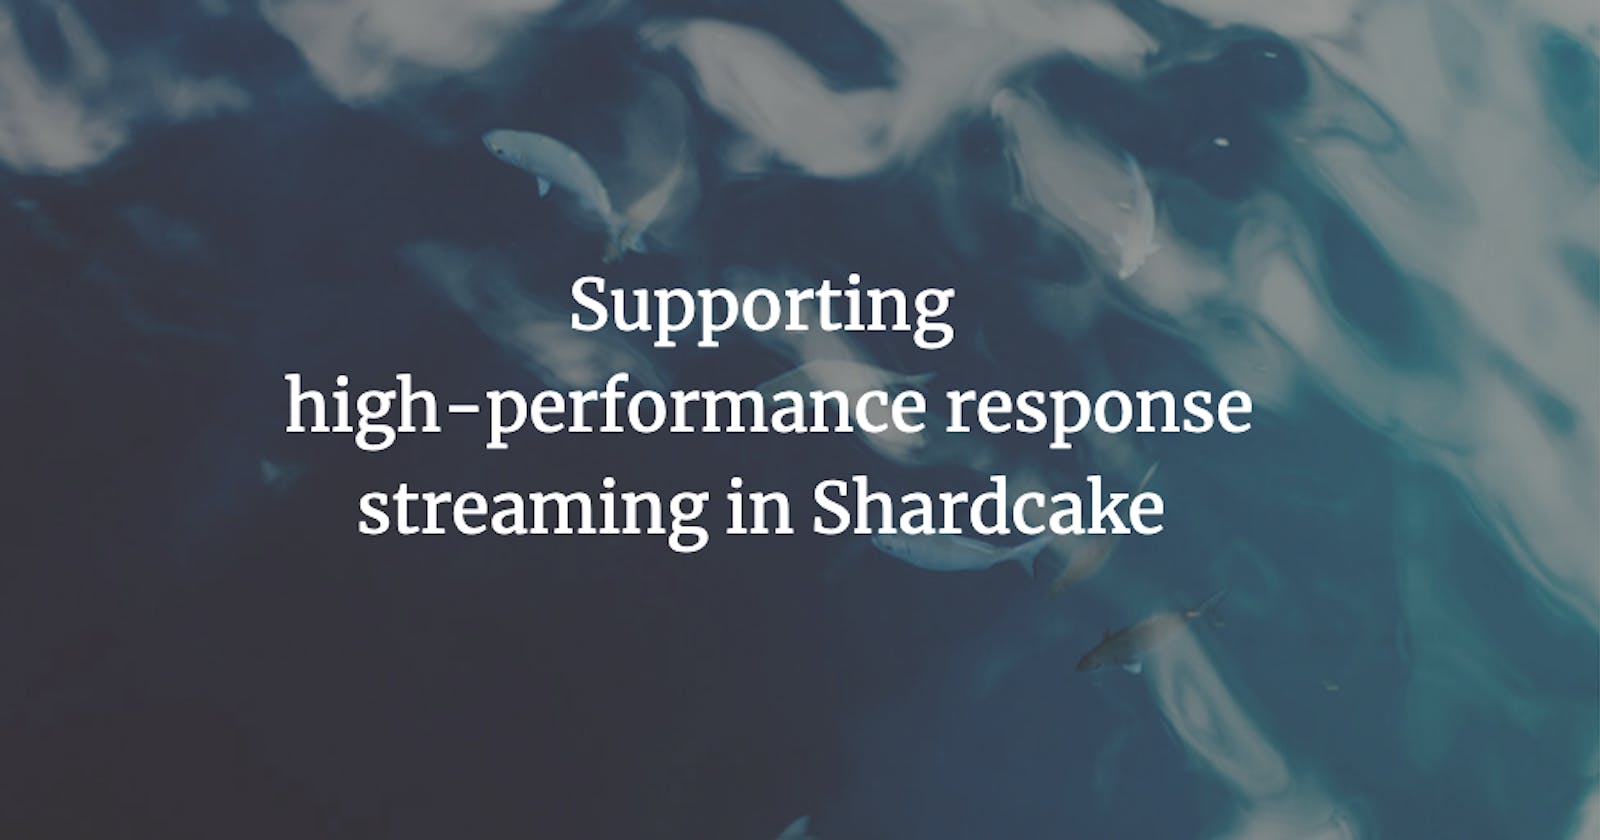 Supporting high-performance response streaming in Shardcake